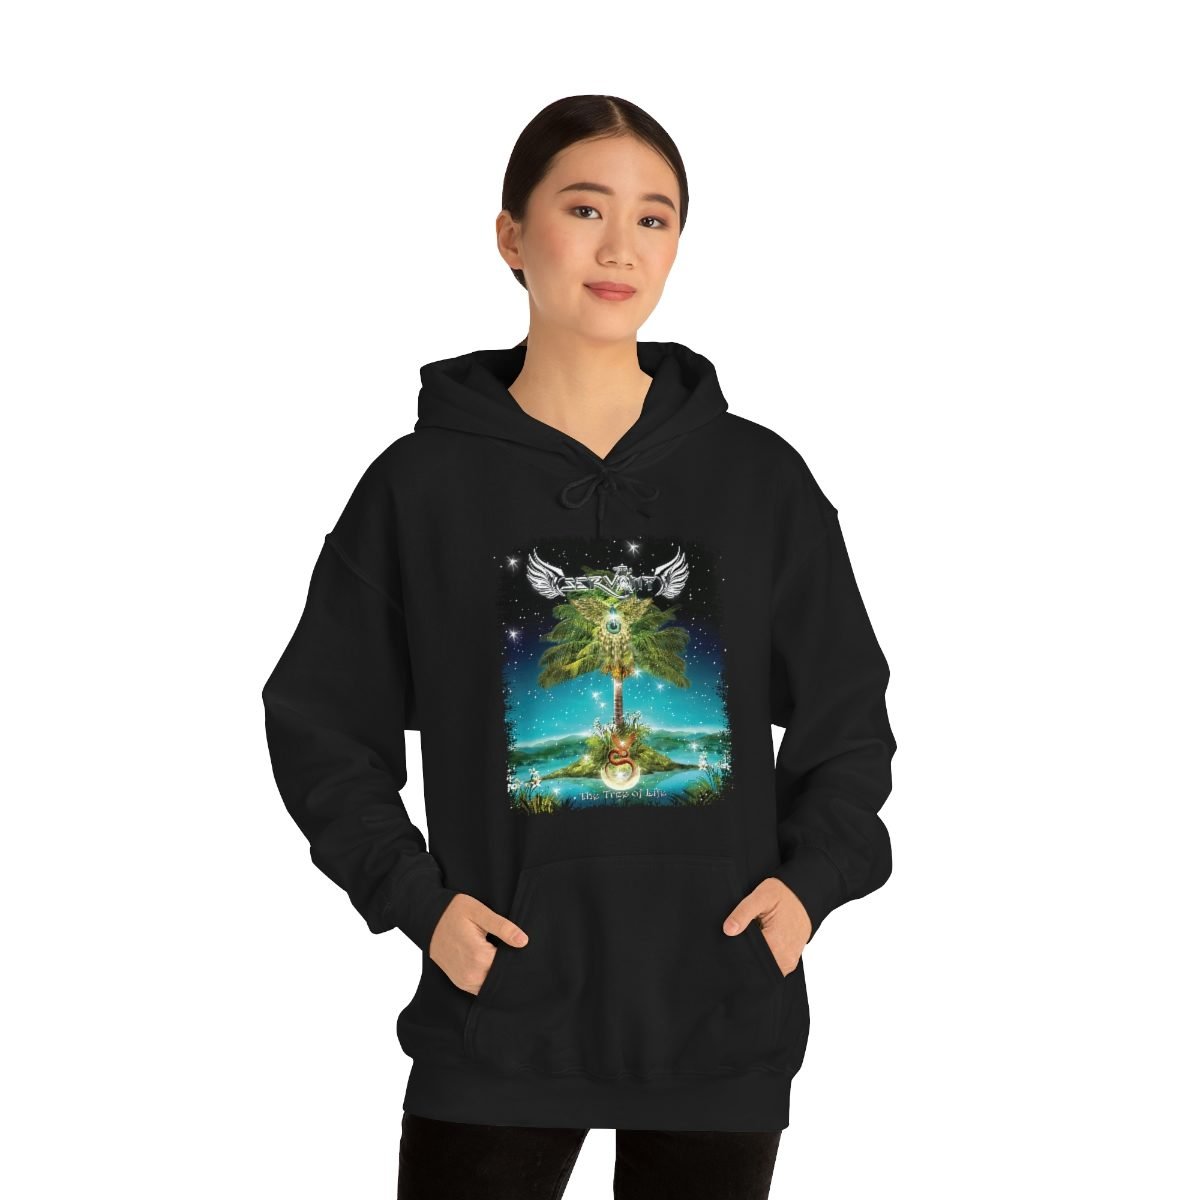 Seventh Servant – The Tree of Life Pullover Hooded Sweatshirt